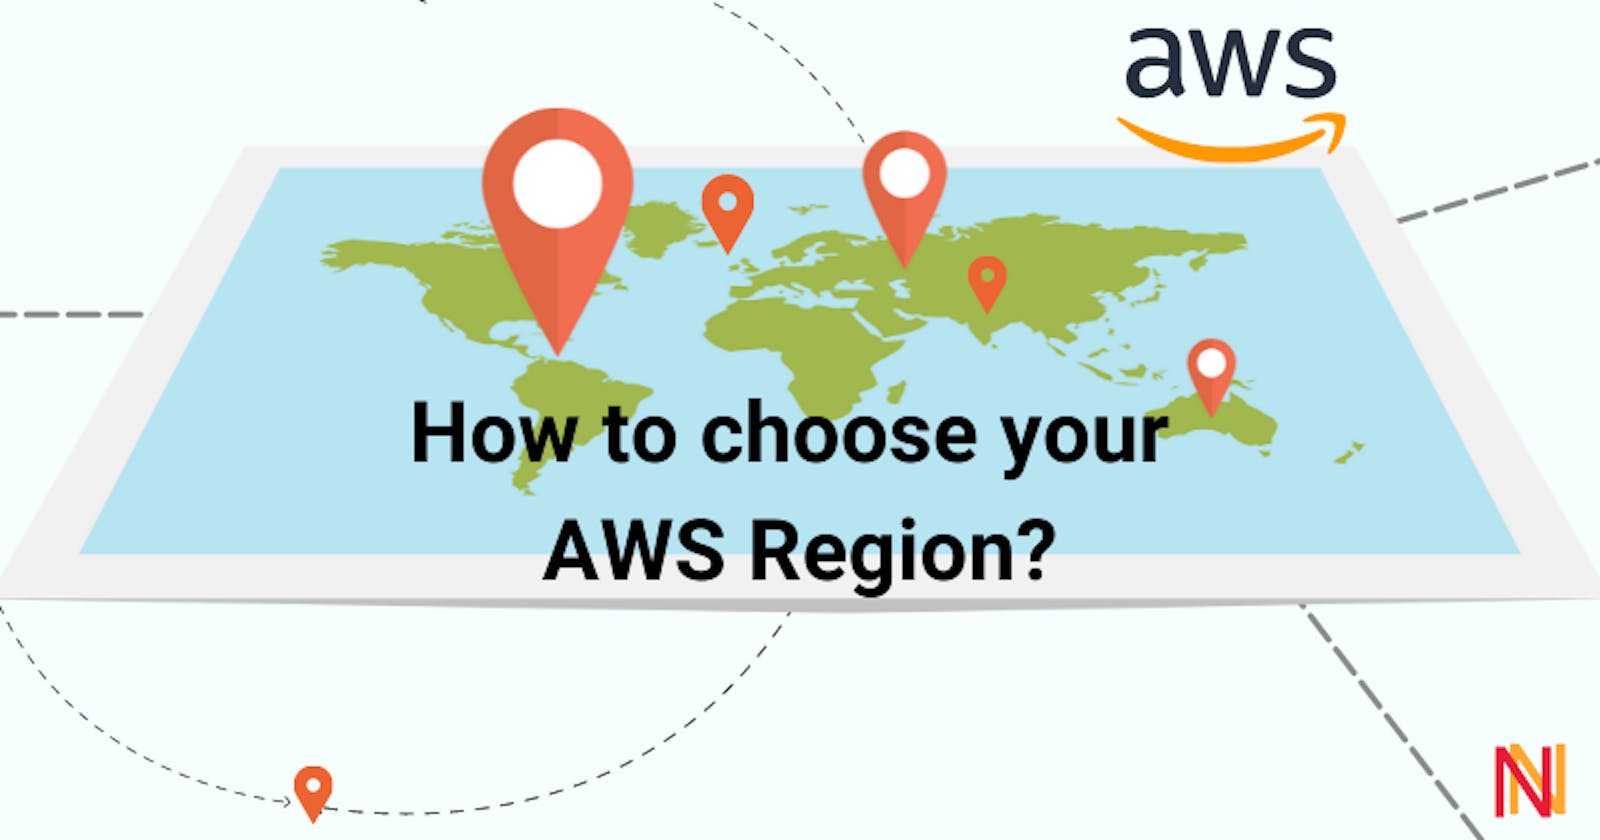 How to choose your AWS Region?